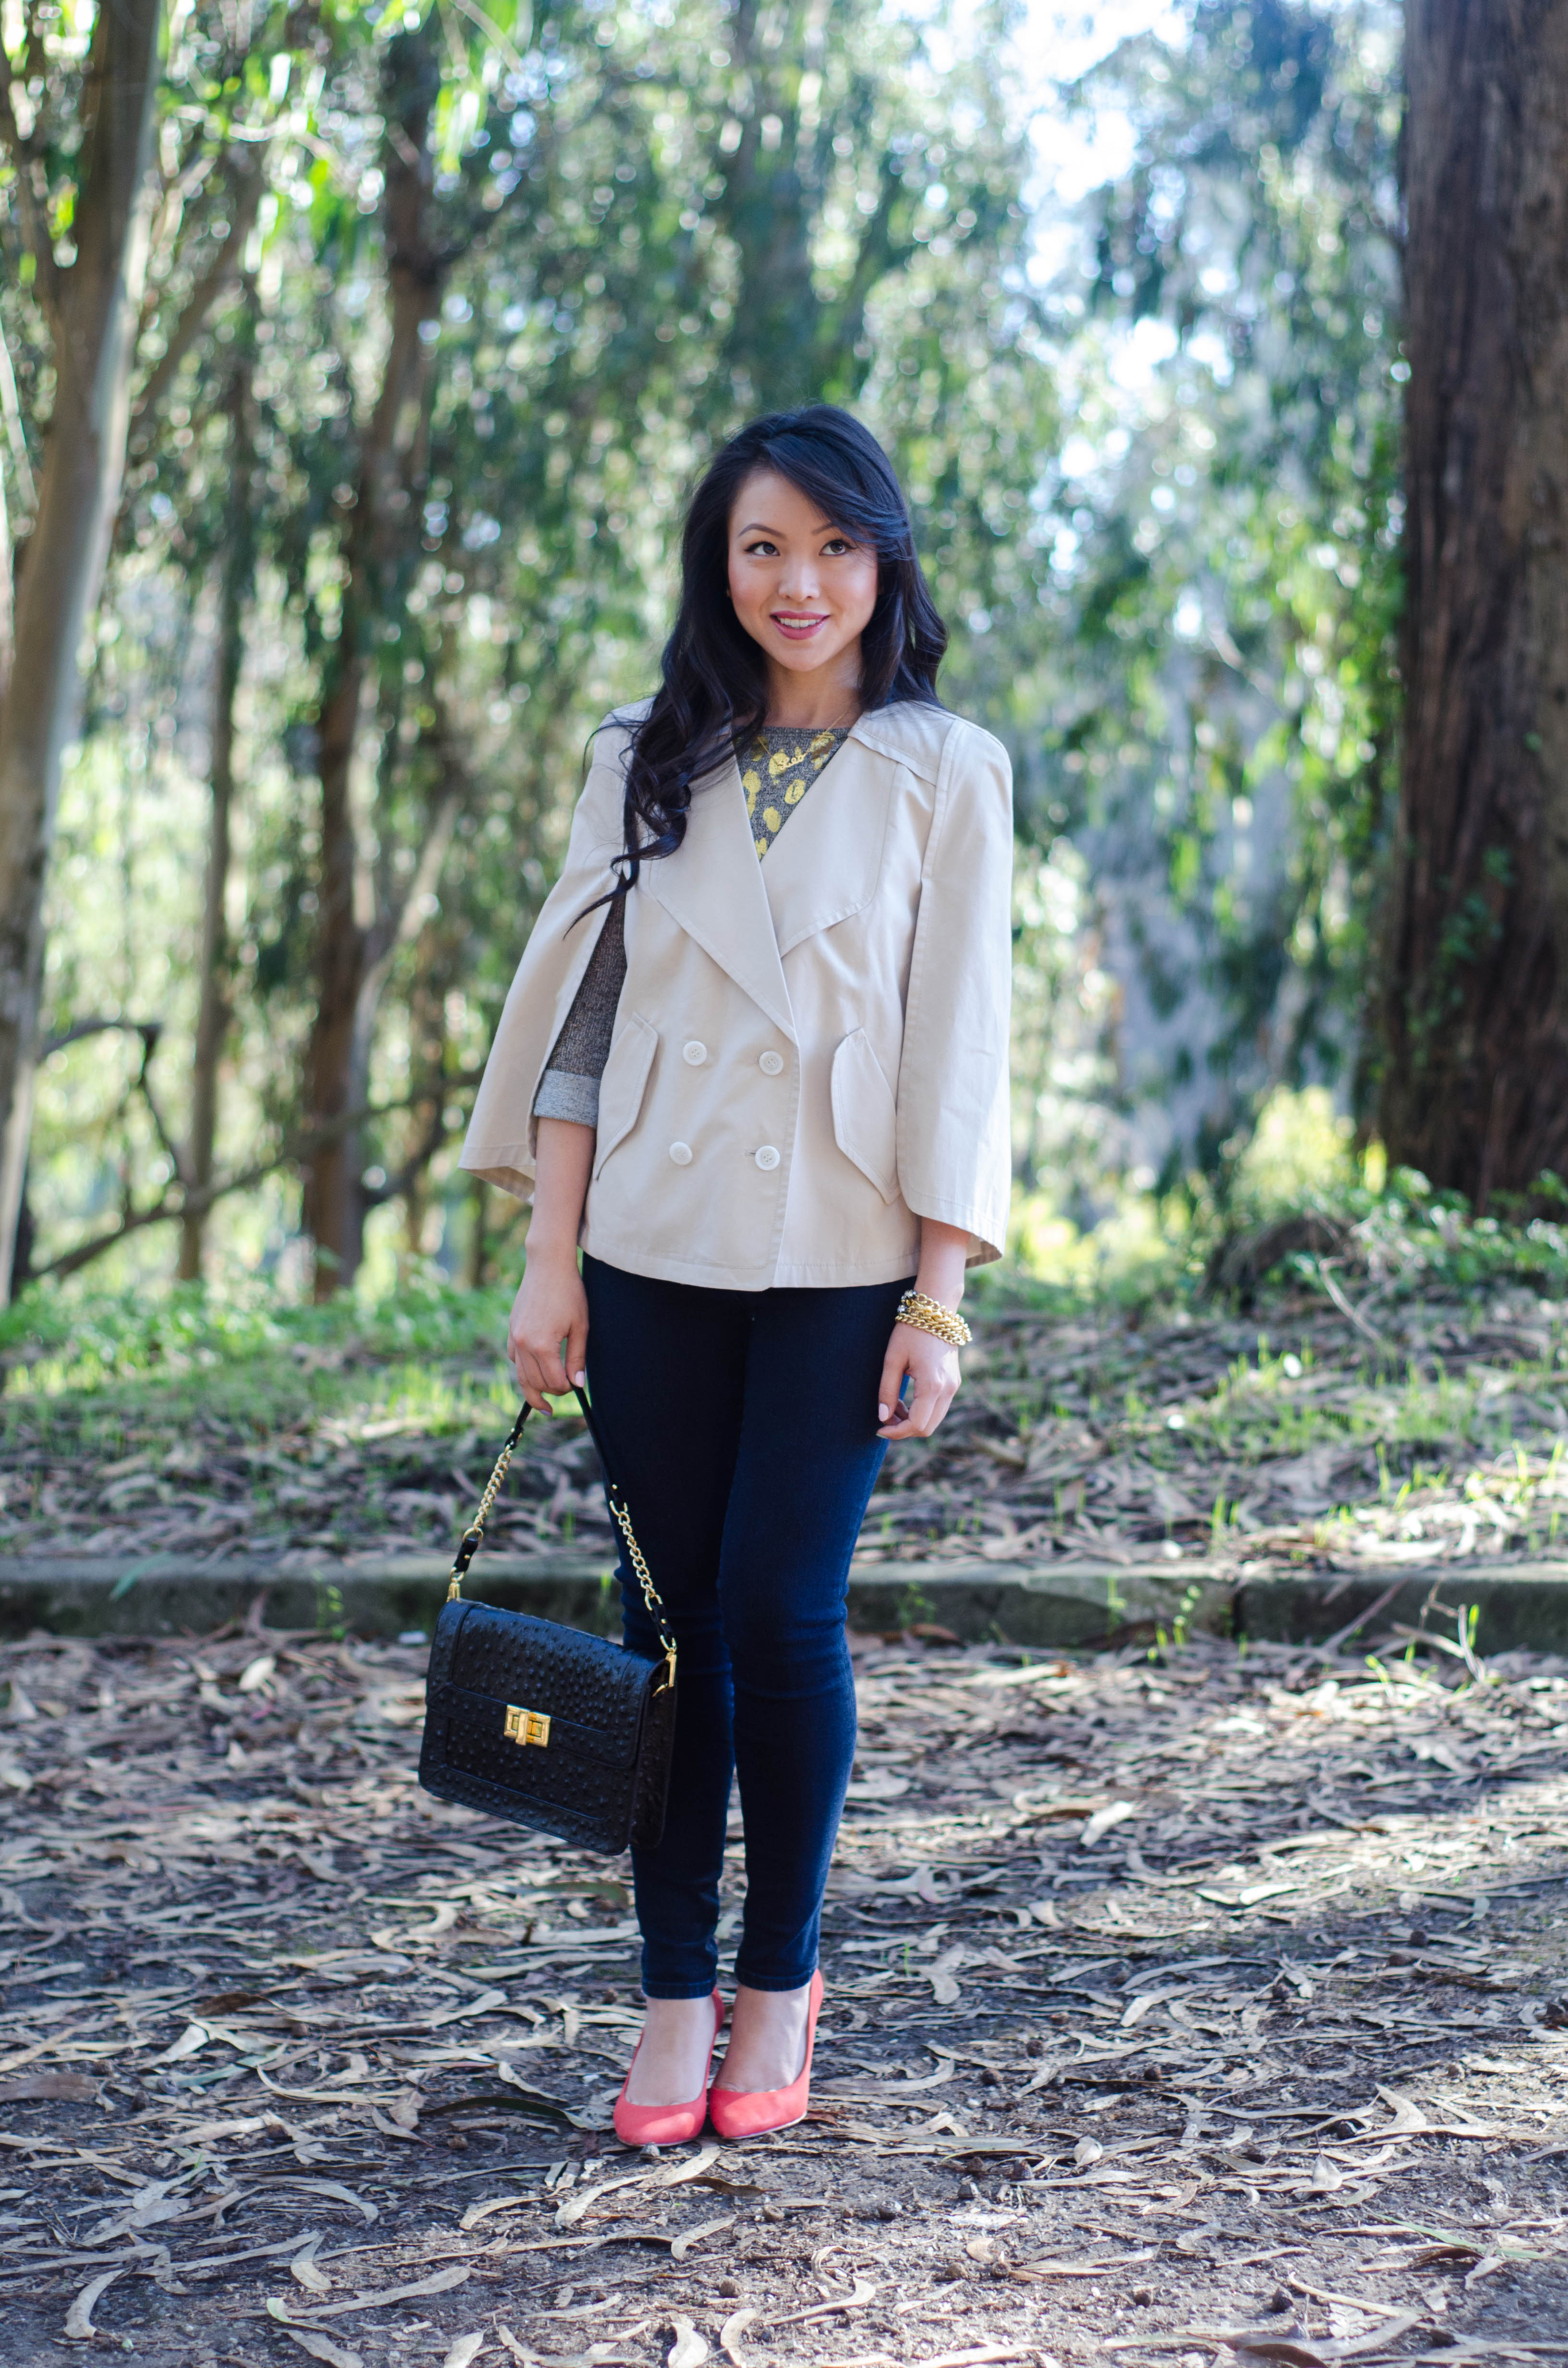 #OOTD: Great esCape - The Fancy Pants Report | San Francisco Fashion Blog3264 x 4928